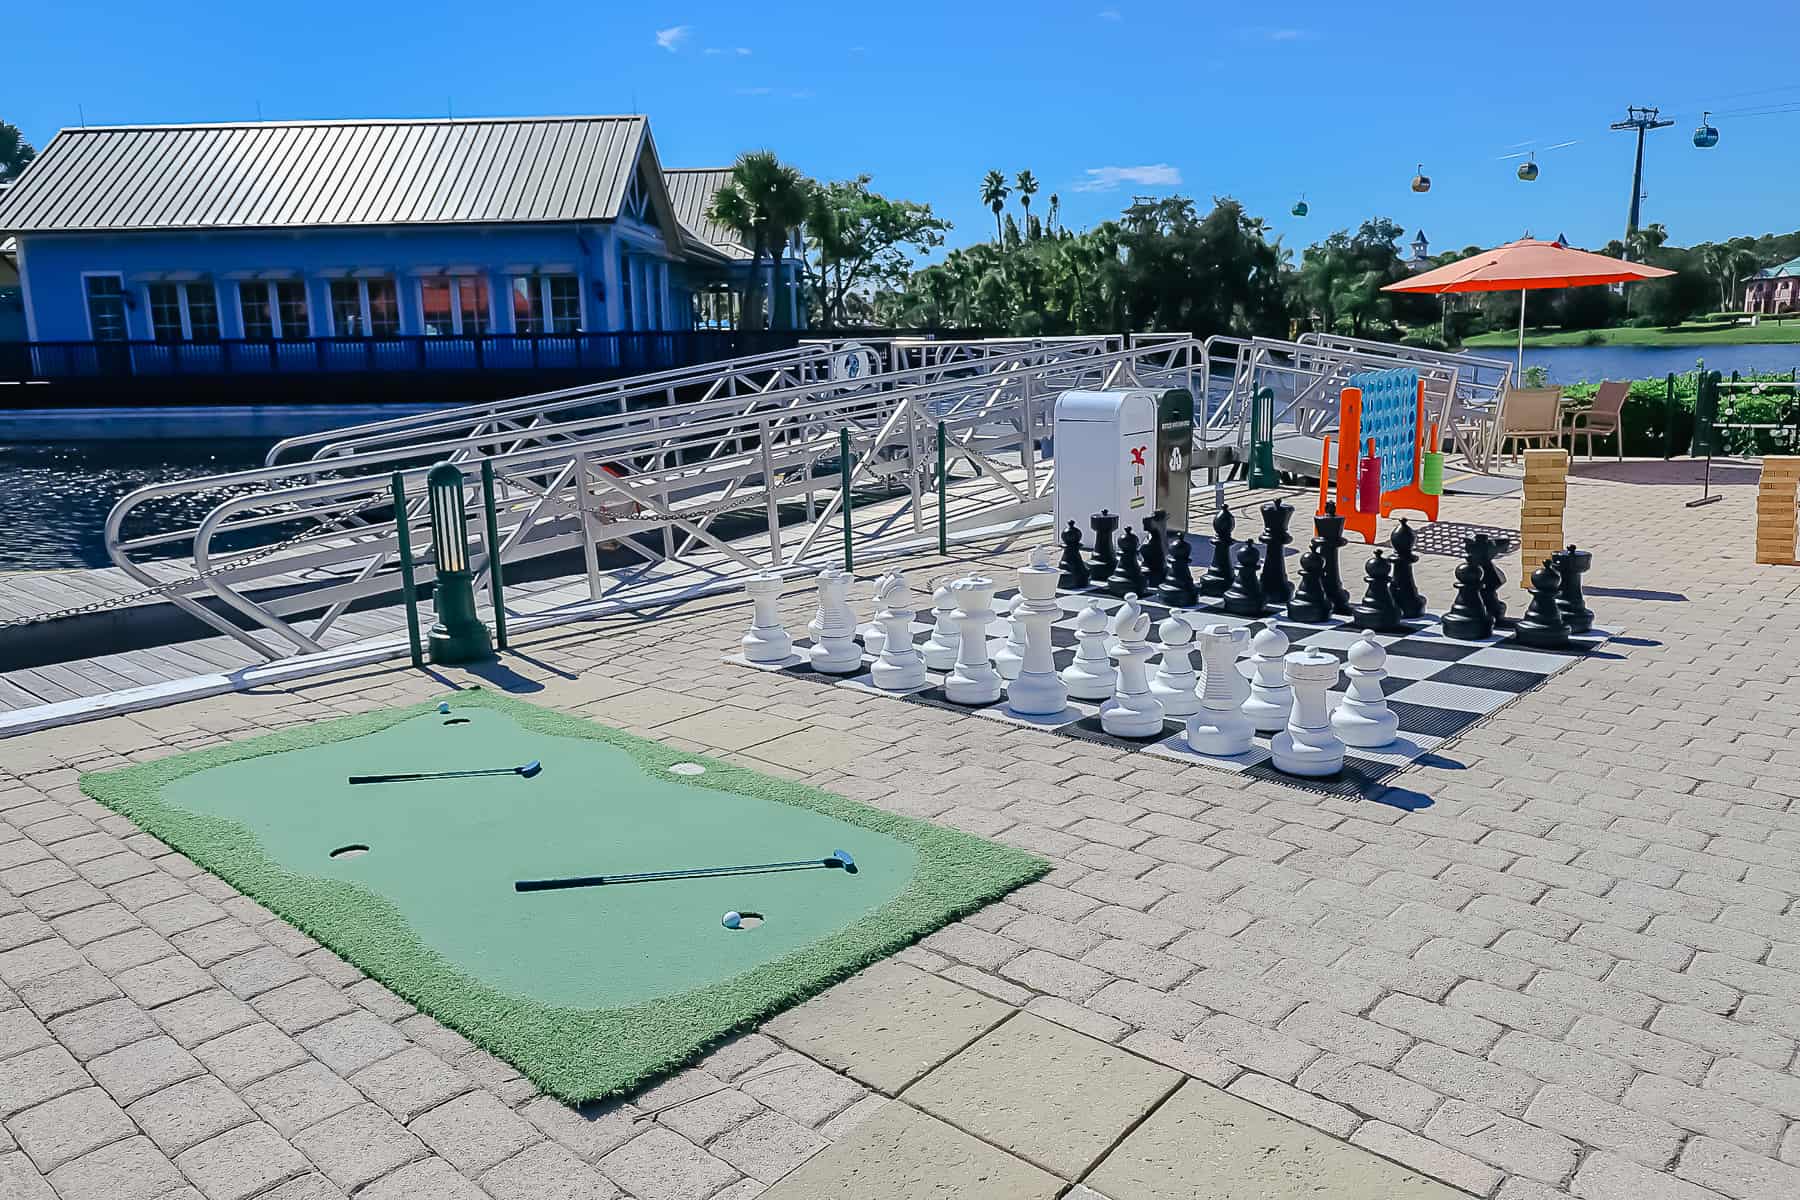 Oversized games like putt putt golf and chess